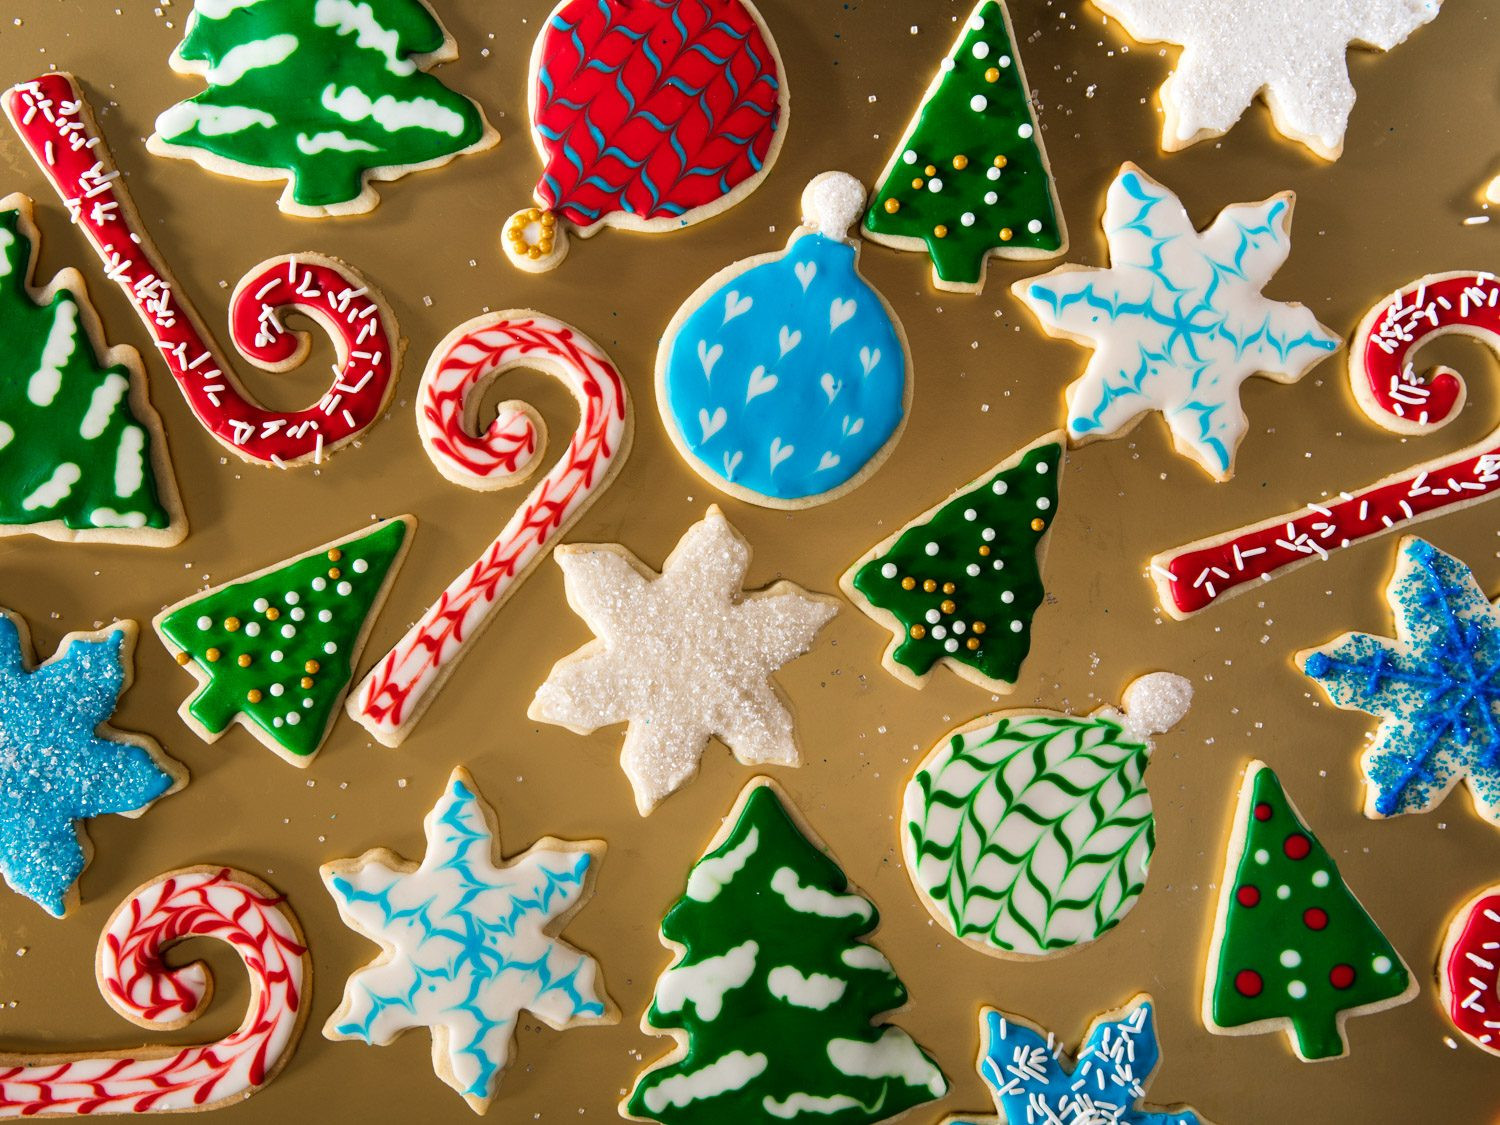 Christmas Cookies Decorated
 A Royal Icing Tutorial Decorate Christmas Cookies Like a